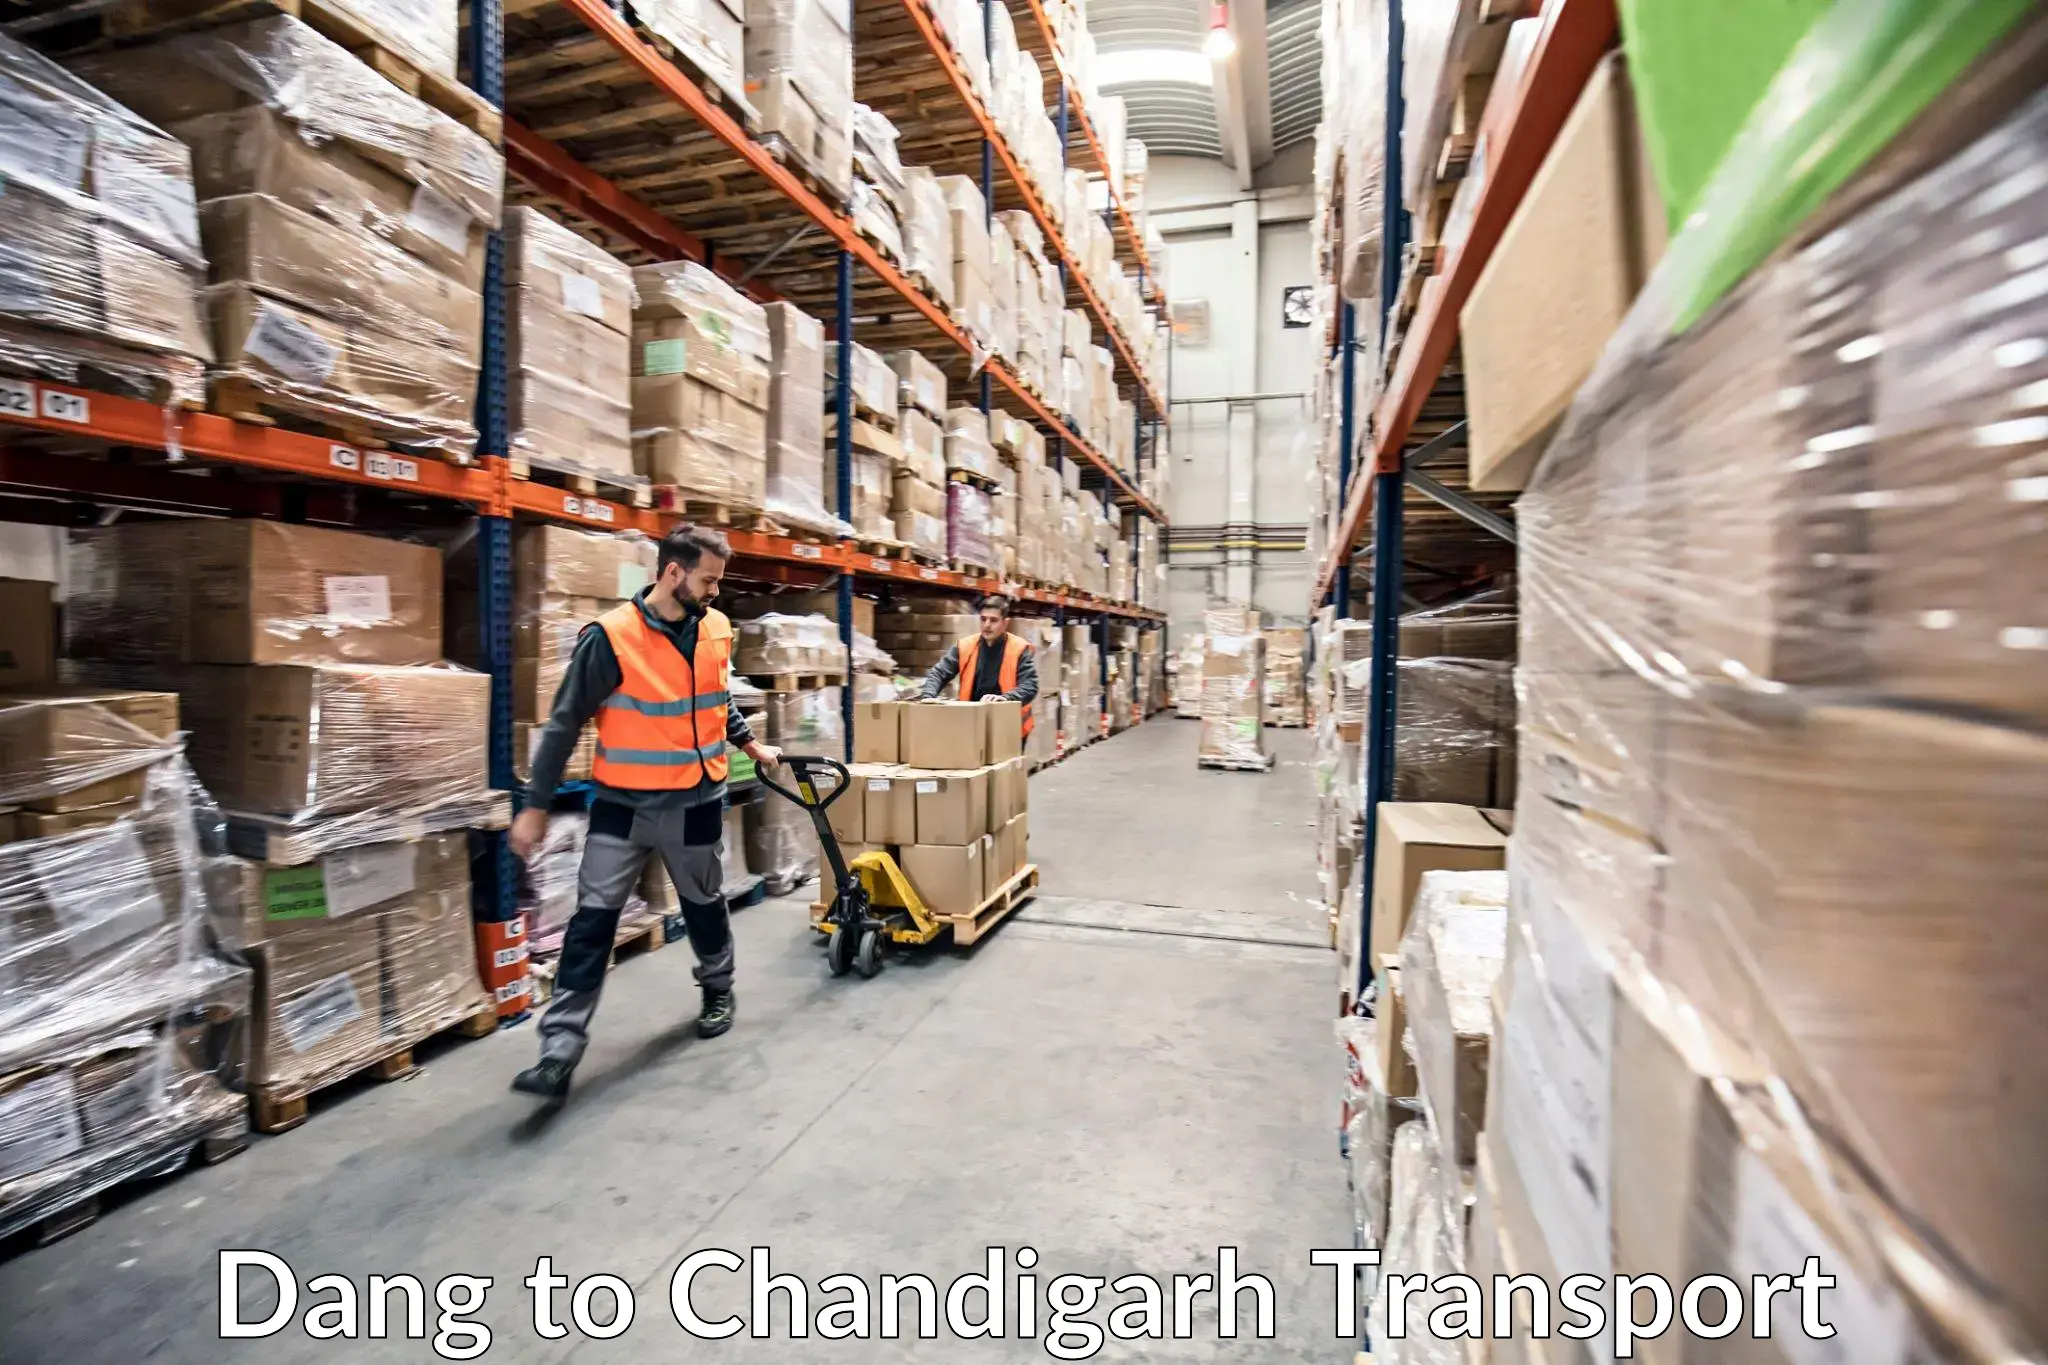 Part load transport service in India Dang to Chandigarh